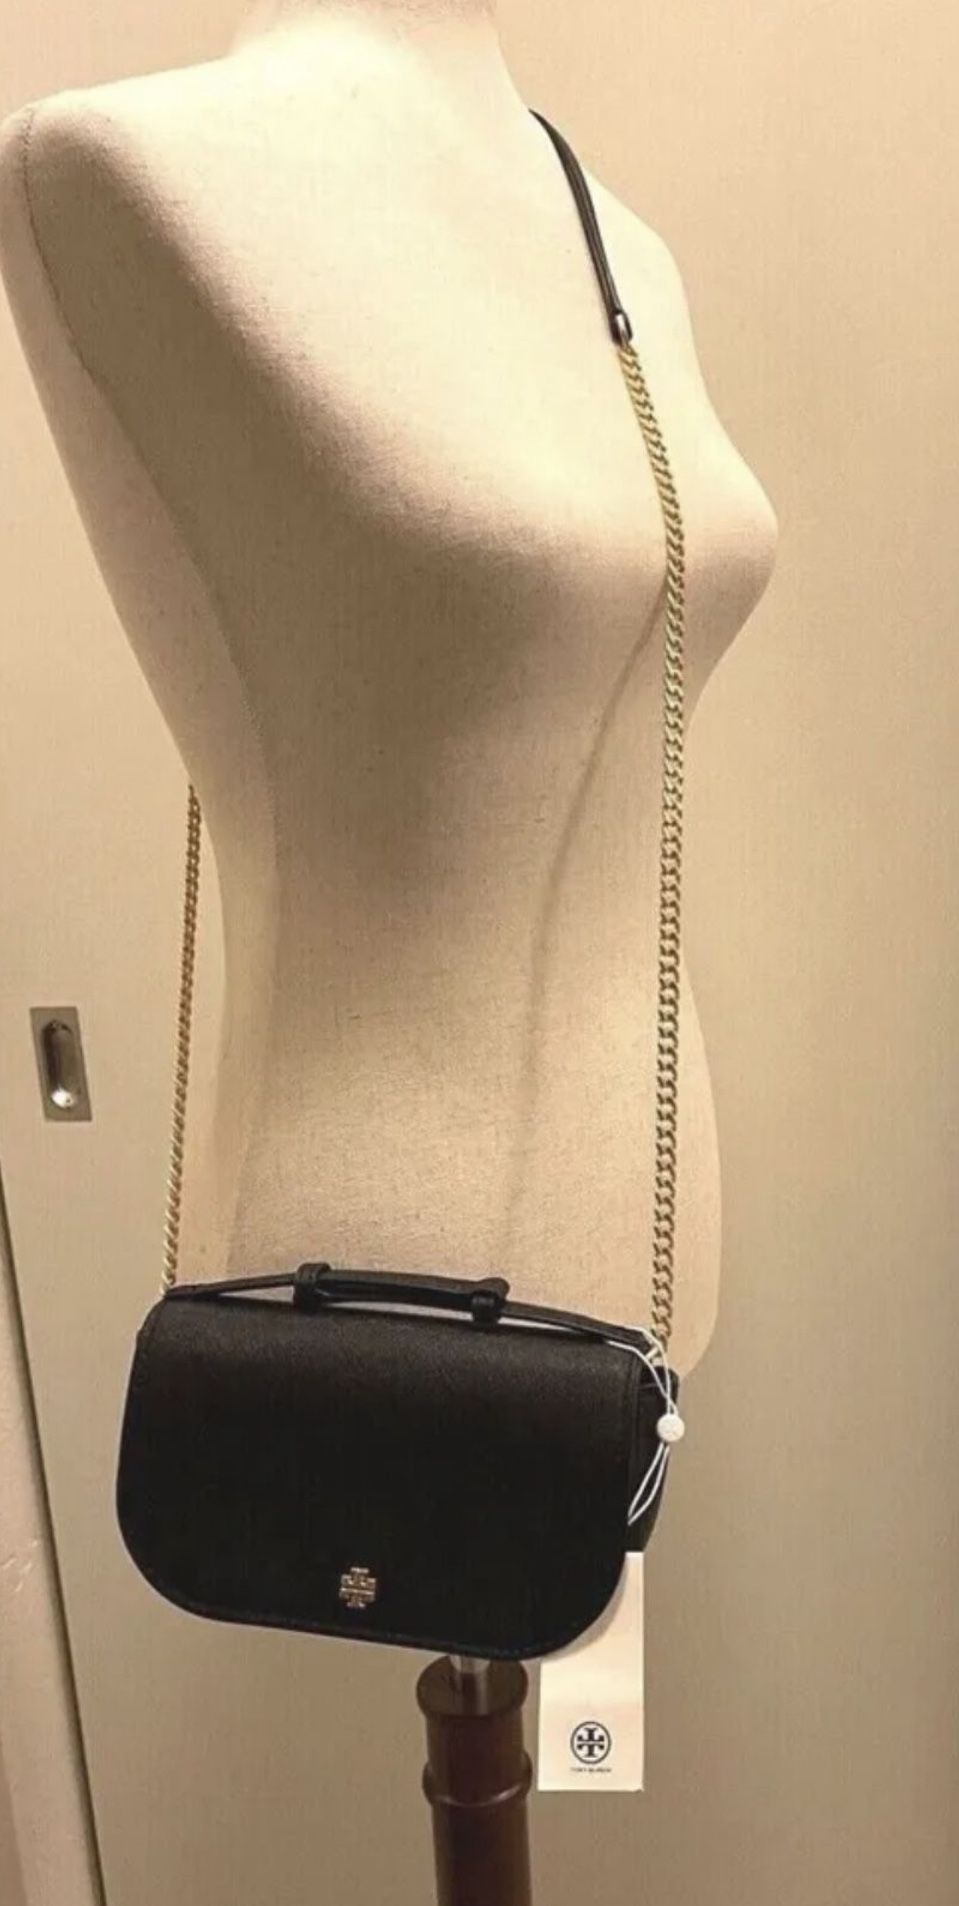 New , Tory Burch Emerson Crossbody Bag for Sale in Temecula, CA - OfferUp